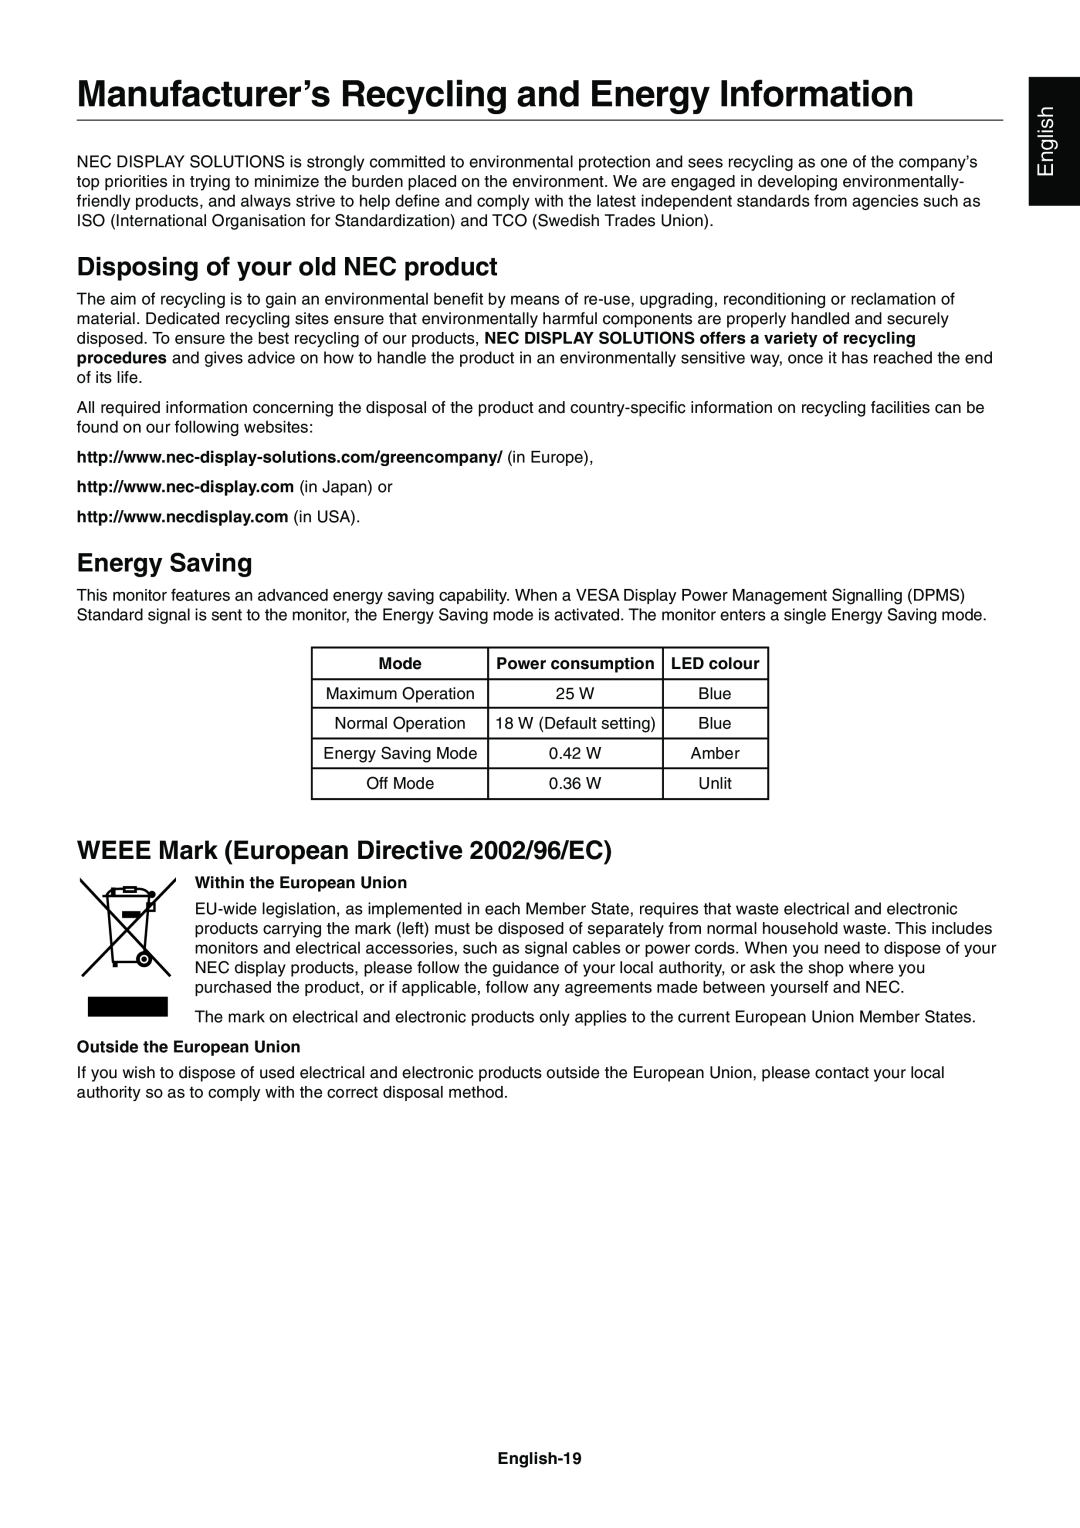 NEC E201W Manufacturer’s Recycling and Energy Information, Disposing of your old NEC product, Energy Saving, English 